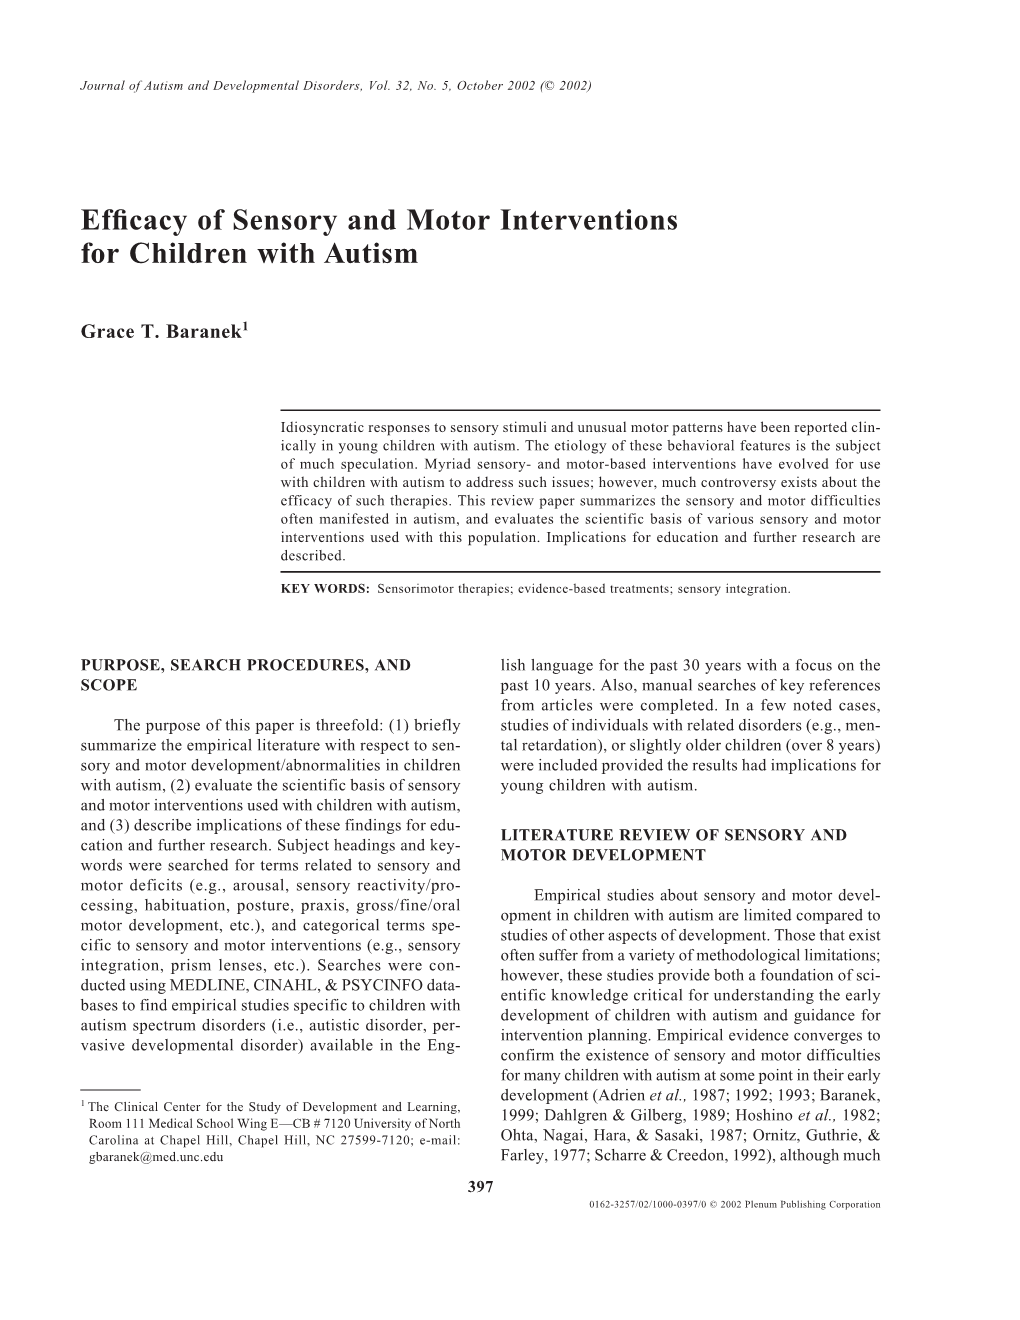 Efficacy of Sensory and Motor Interventions for Children with Autism